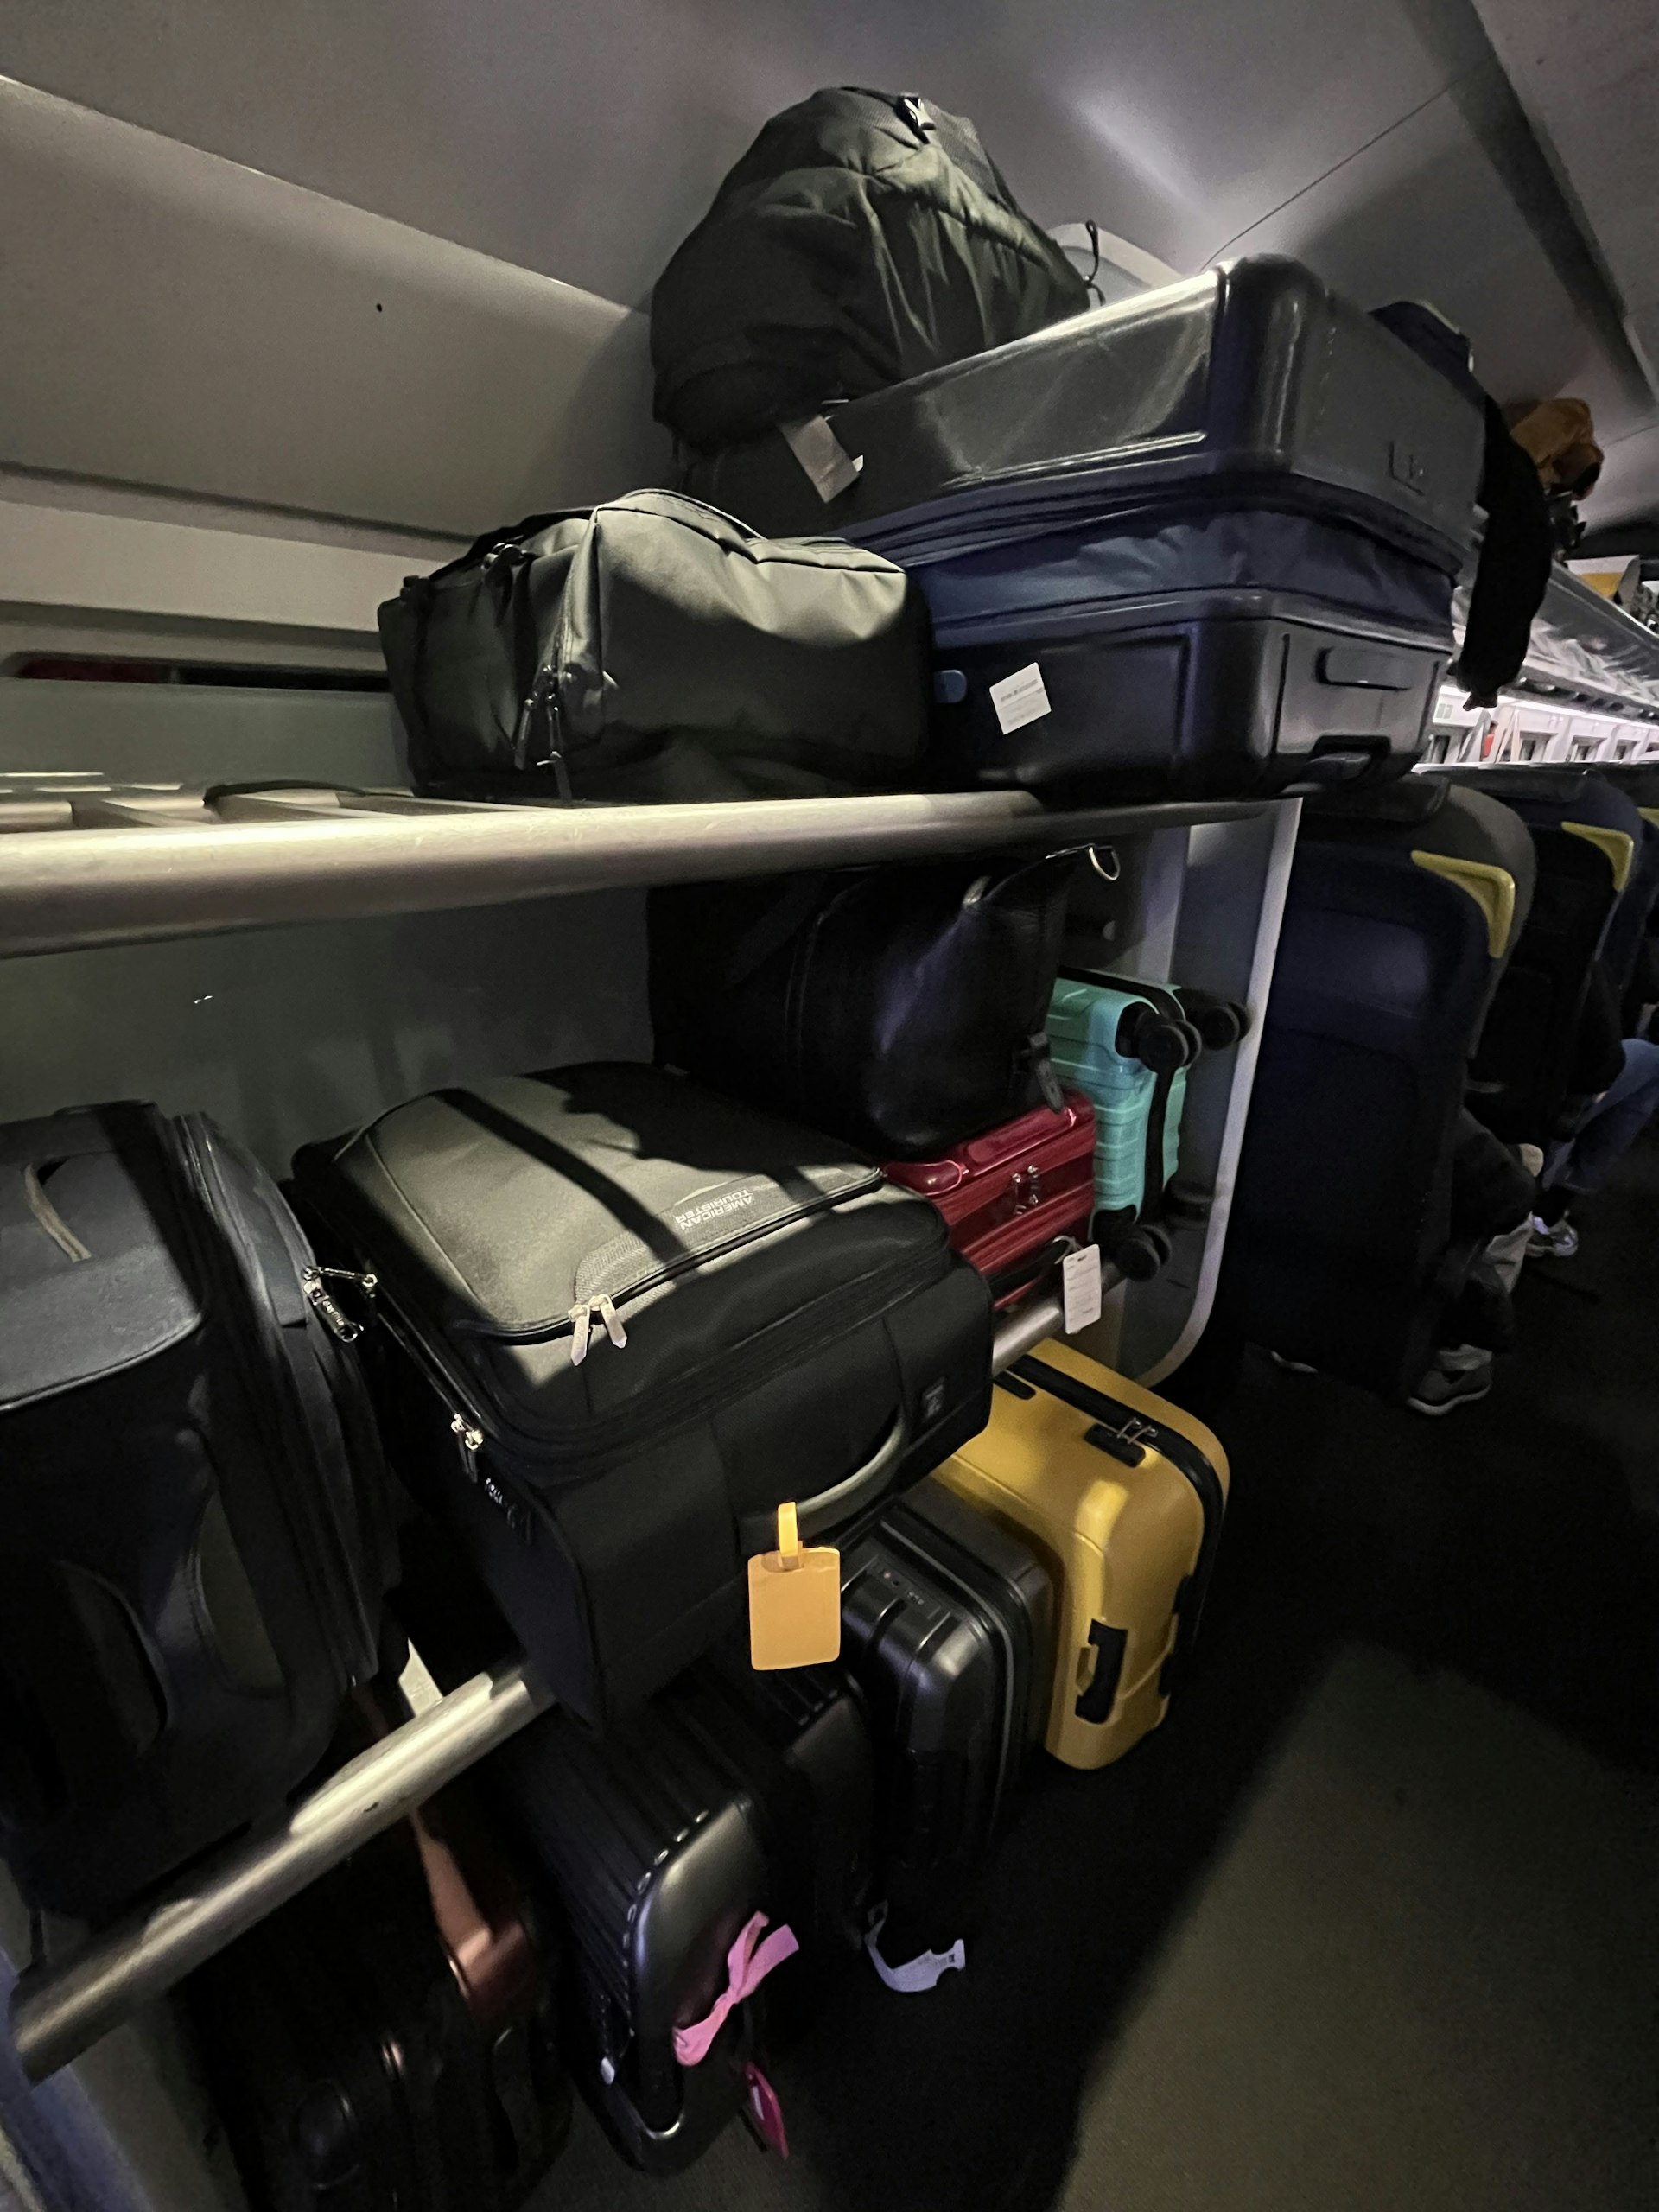 Suitcases and wheelie bags stacked on a luggage rack on board a train